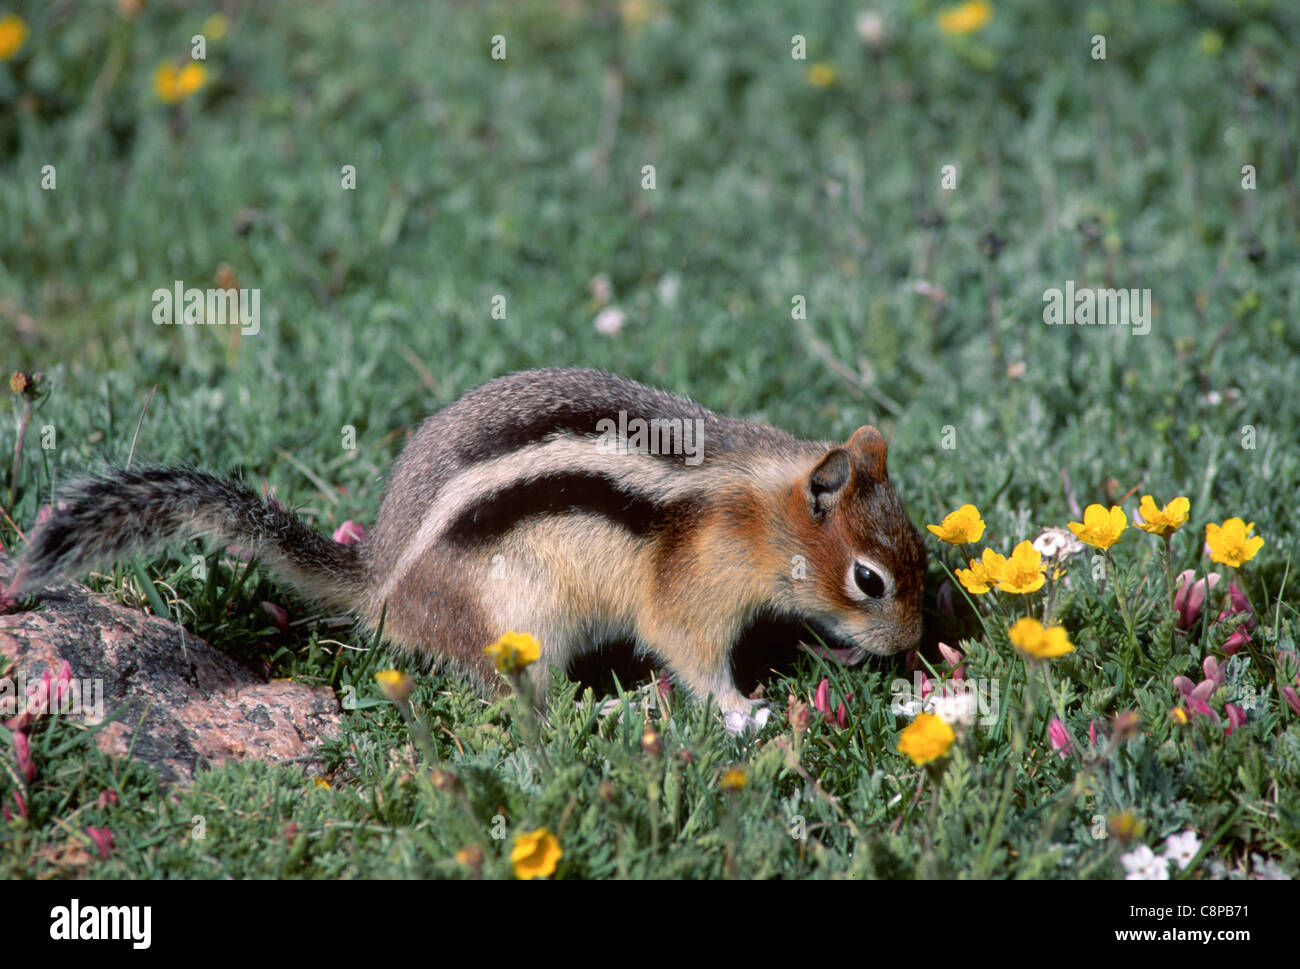 GOLDEN-MANTLED GROUND SQUIRREL (Callospermophilus lateralis) among flowers, Rocky Mountain National Park, Colorado, USA Stock Photo